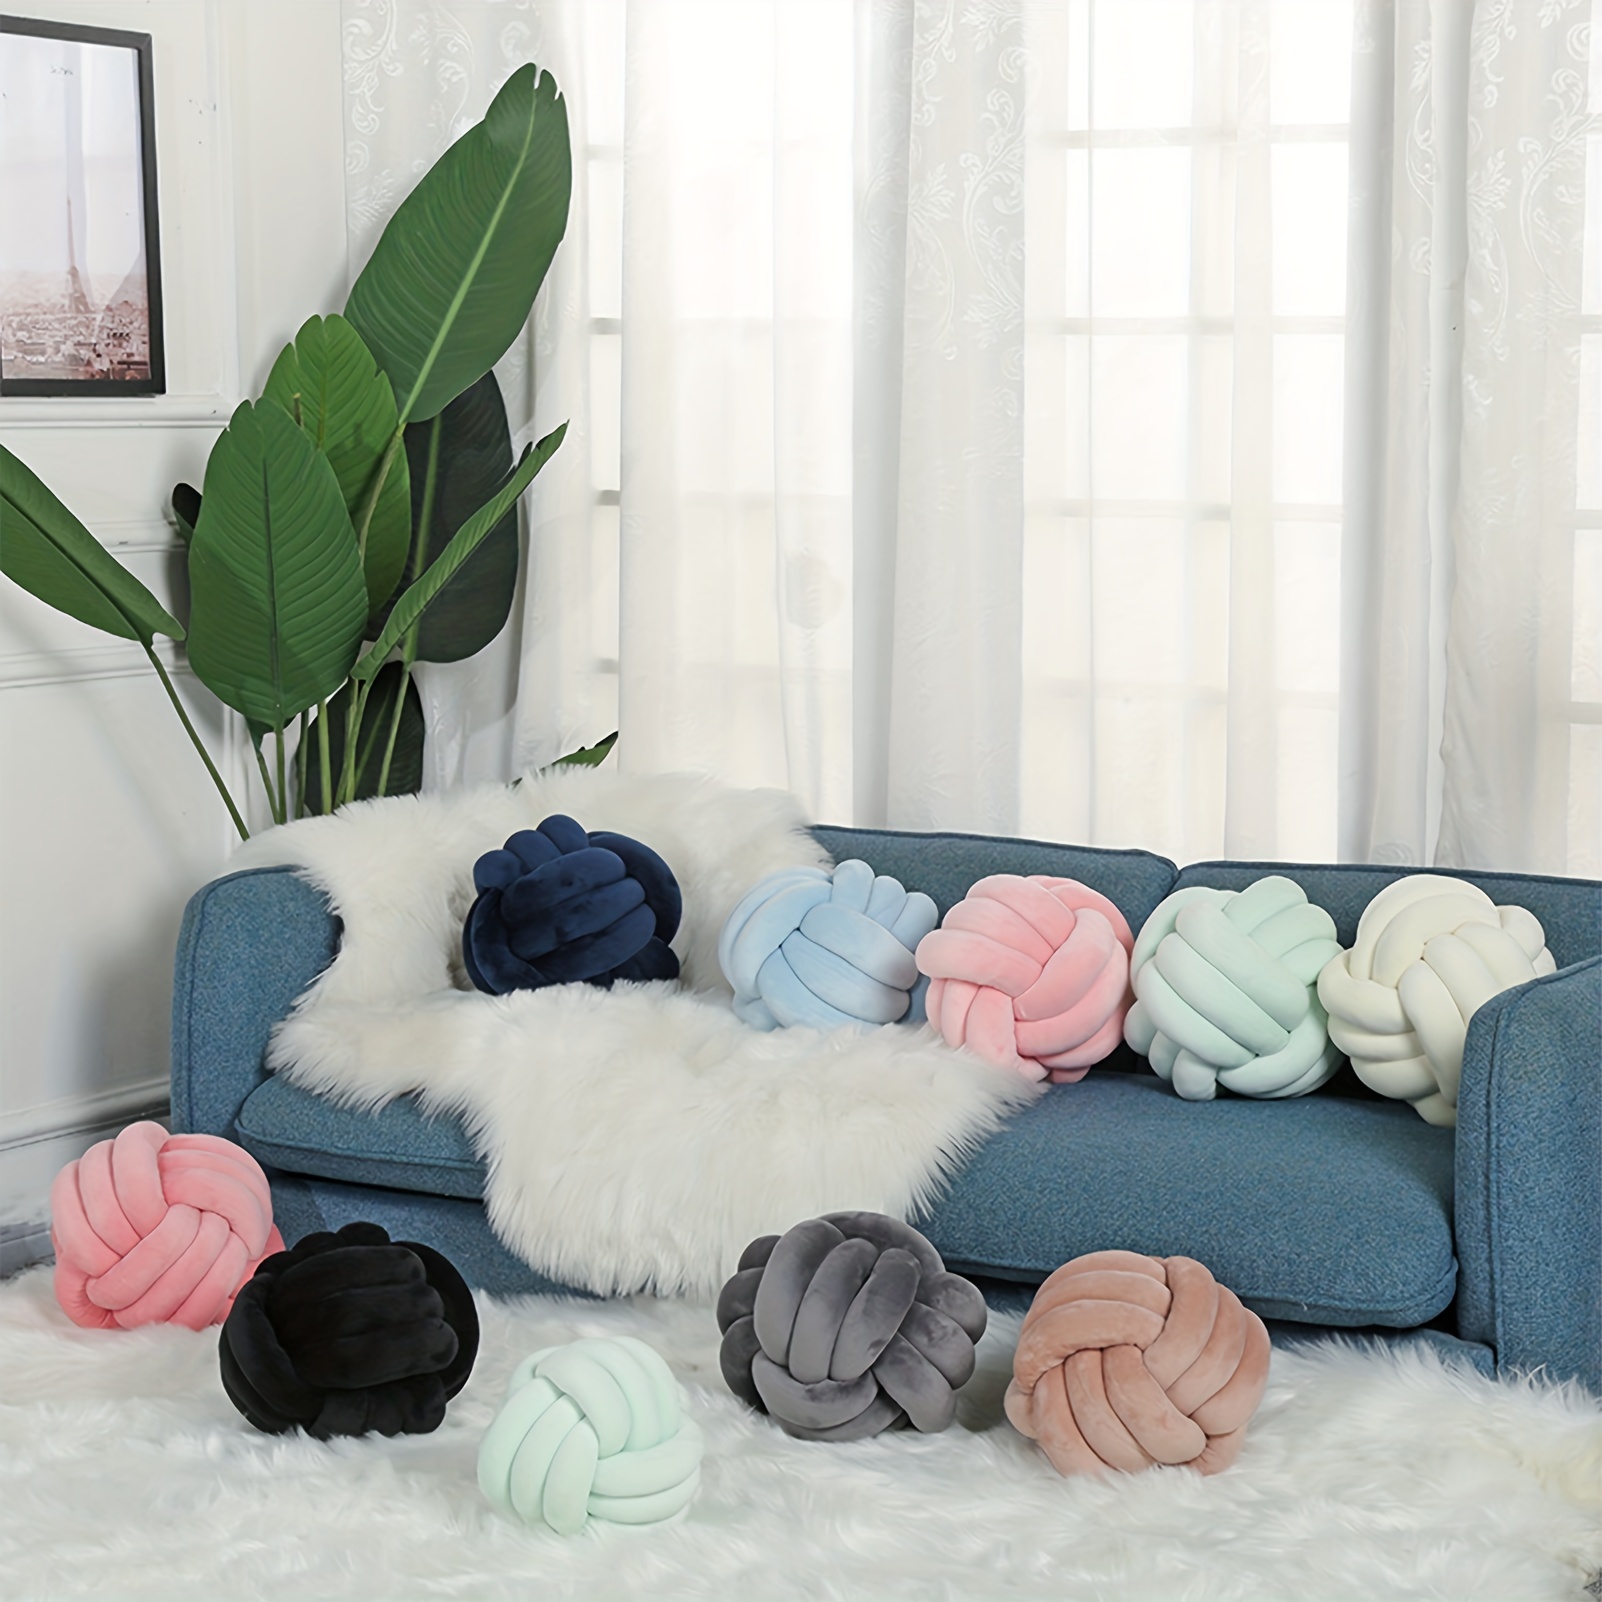 Knot Pillow Throw Pillows for Couch Pillows for Living Room Soft Cute Small  Pillows Decorative Knotted Pillow Used to Add Comfort and Style to a Couch,  Sofa, or Living Room 